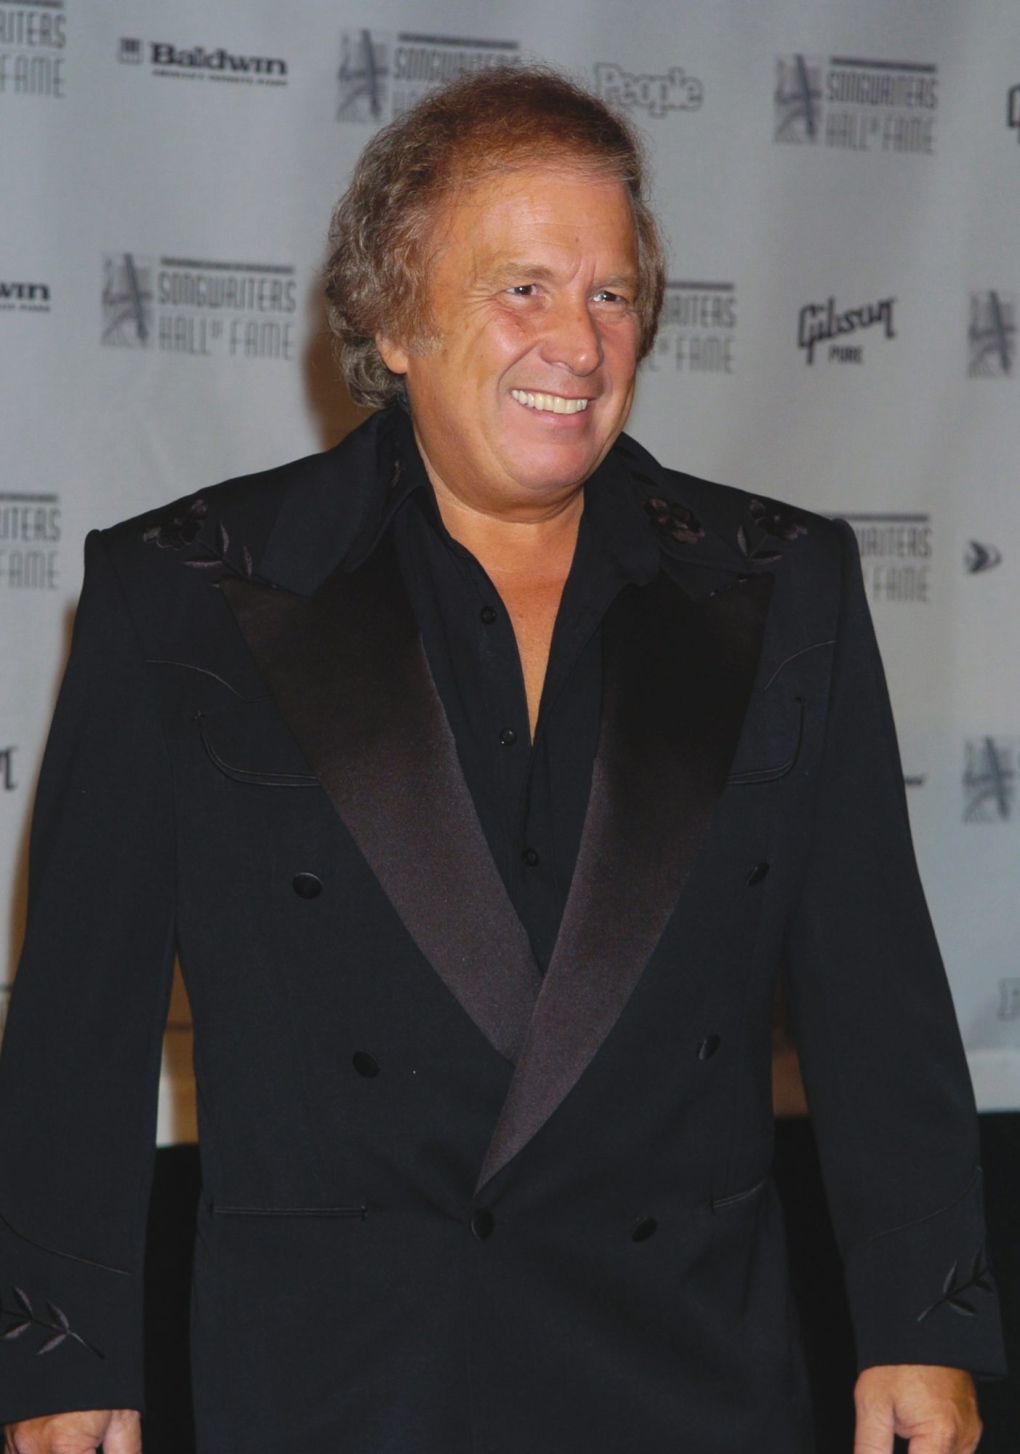 Don McLean in 2004